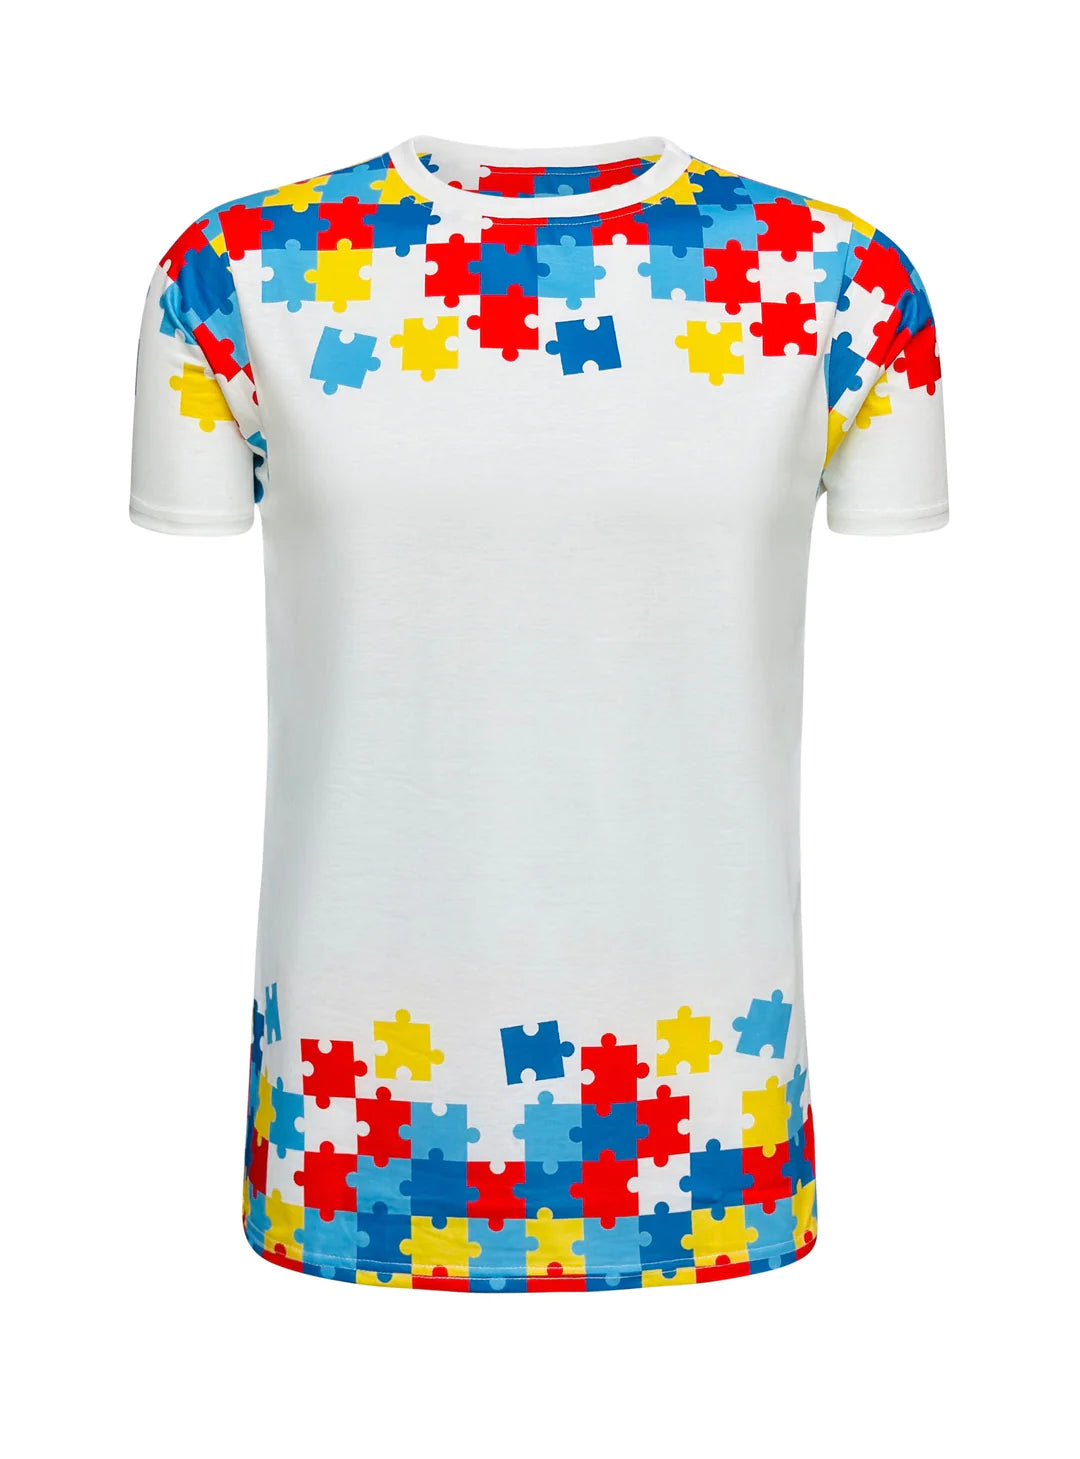 Faux Bleached Autism Blank Shirt, ready for Sublimation or Screen Transfer